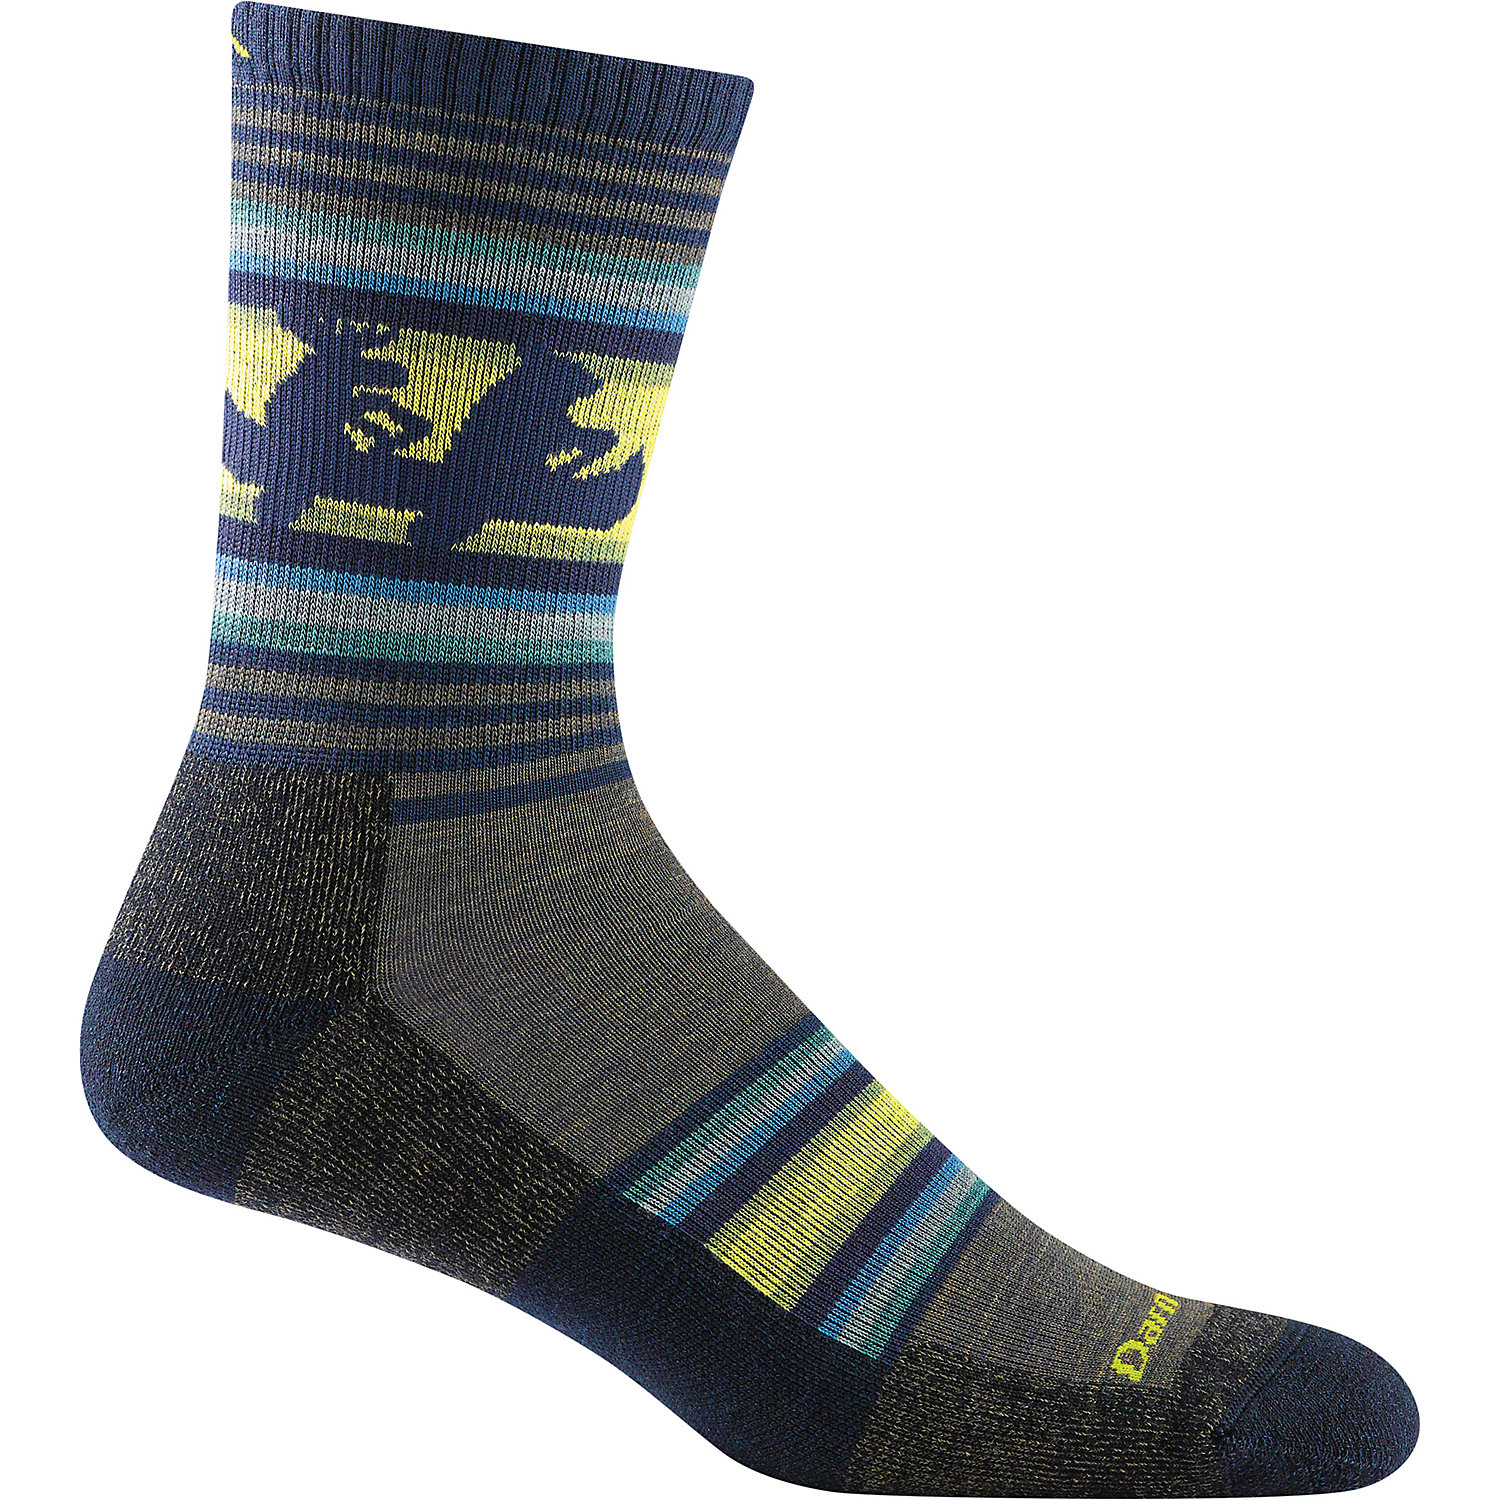 Darn Tough Vermont Darn Tough Mens Willoughby Micro Crew Lightweight with Cushion Sock